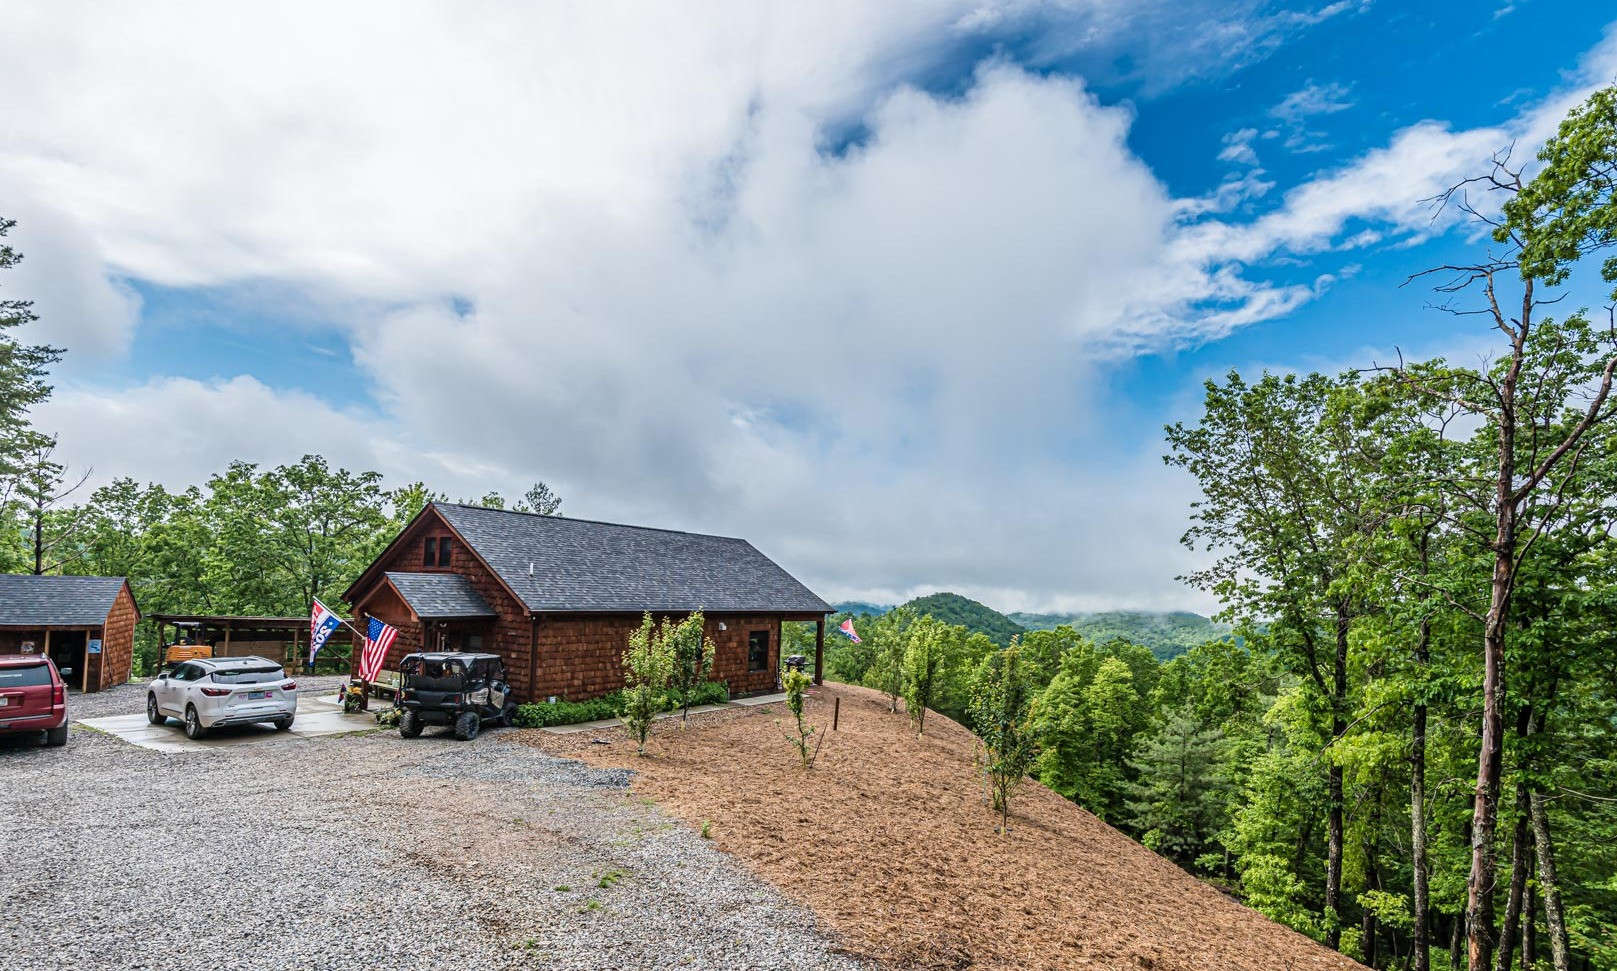 Your NC Mountain Sanctuary Awaits!  This 2-bedroom, 2-bath  cabin is privately nestled among a 2 acre setting with amazing long range mountain vista views in the Parkway Valley community in the Millers Creek area of Wilkes County.